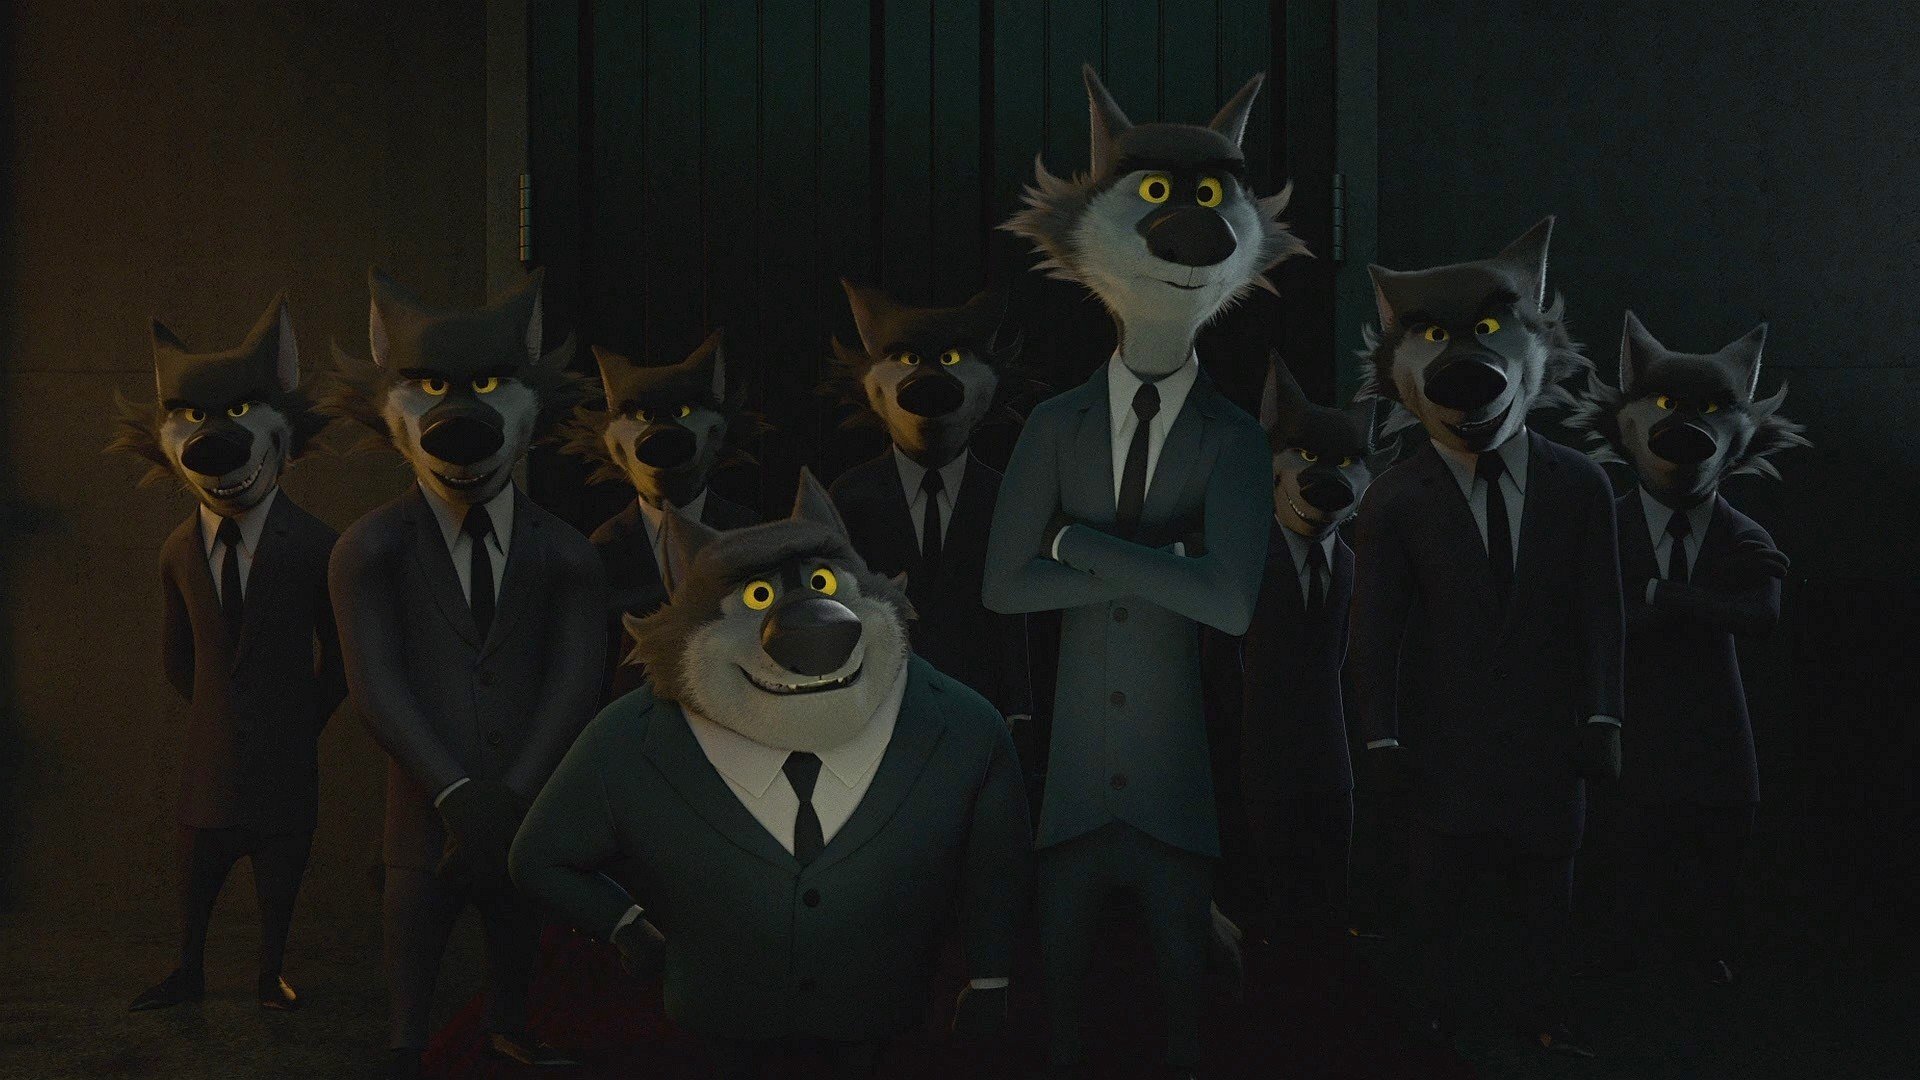 Anthro, Gangsters, Gangster, Rock Dog, Animals, Wolf, 3D, Cartoon, Movies, Suits, Clothing, Tie, Screen shot, Screengrab Wallpaper